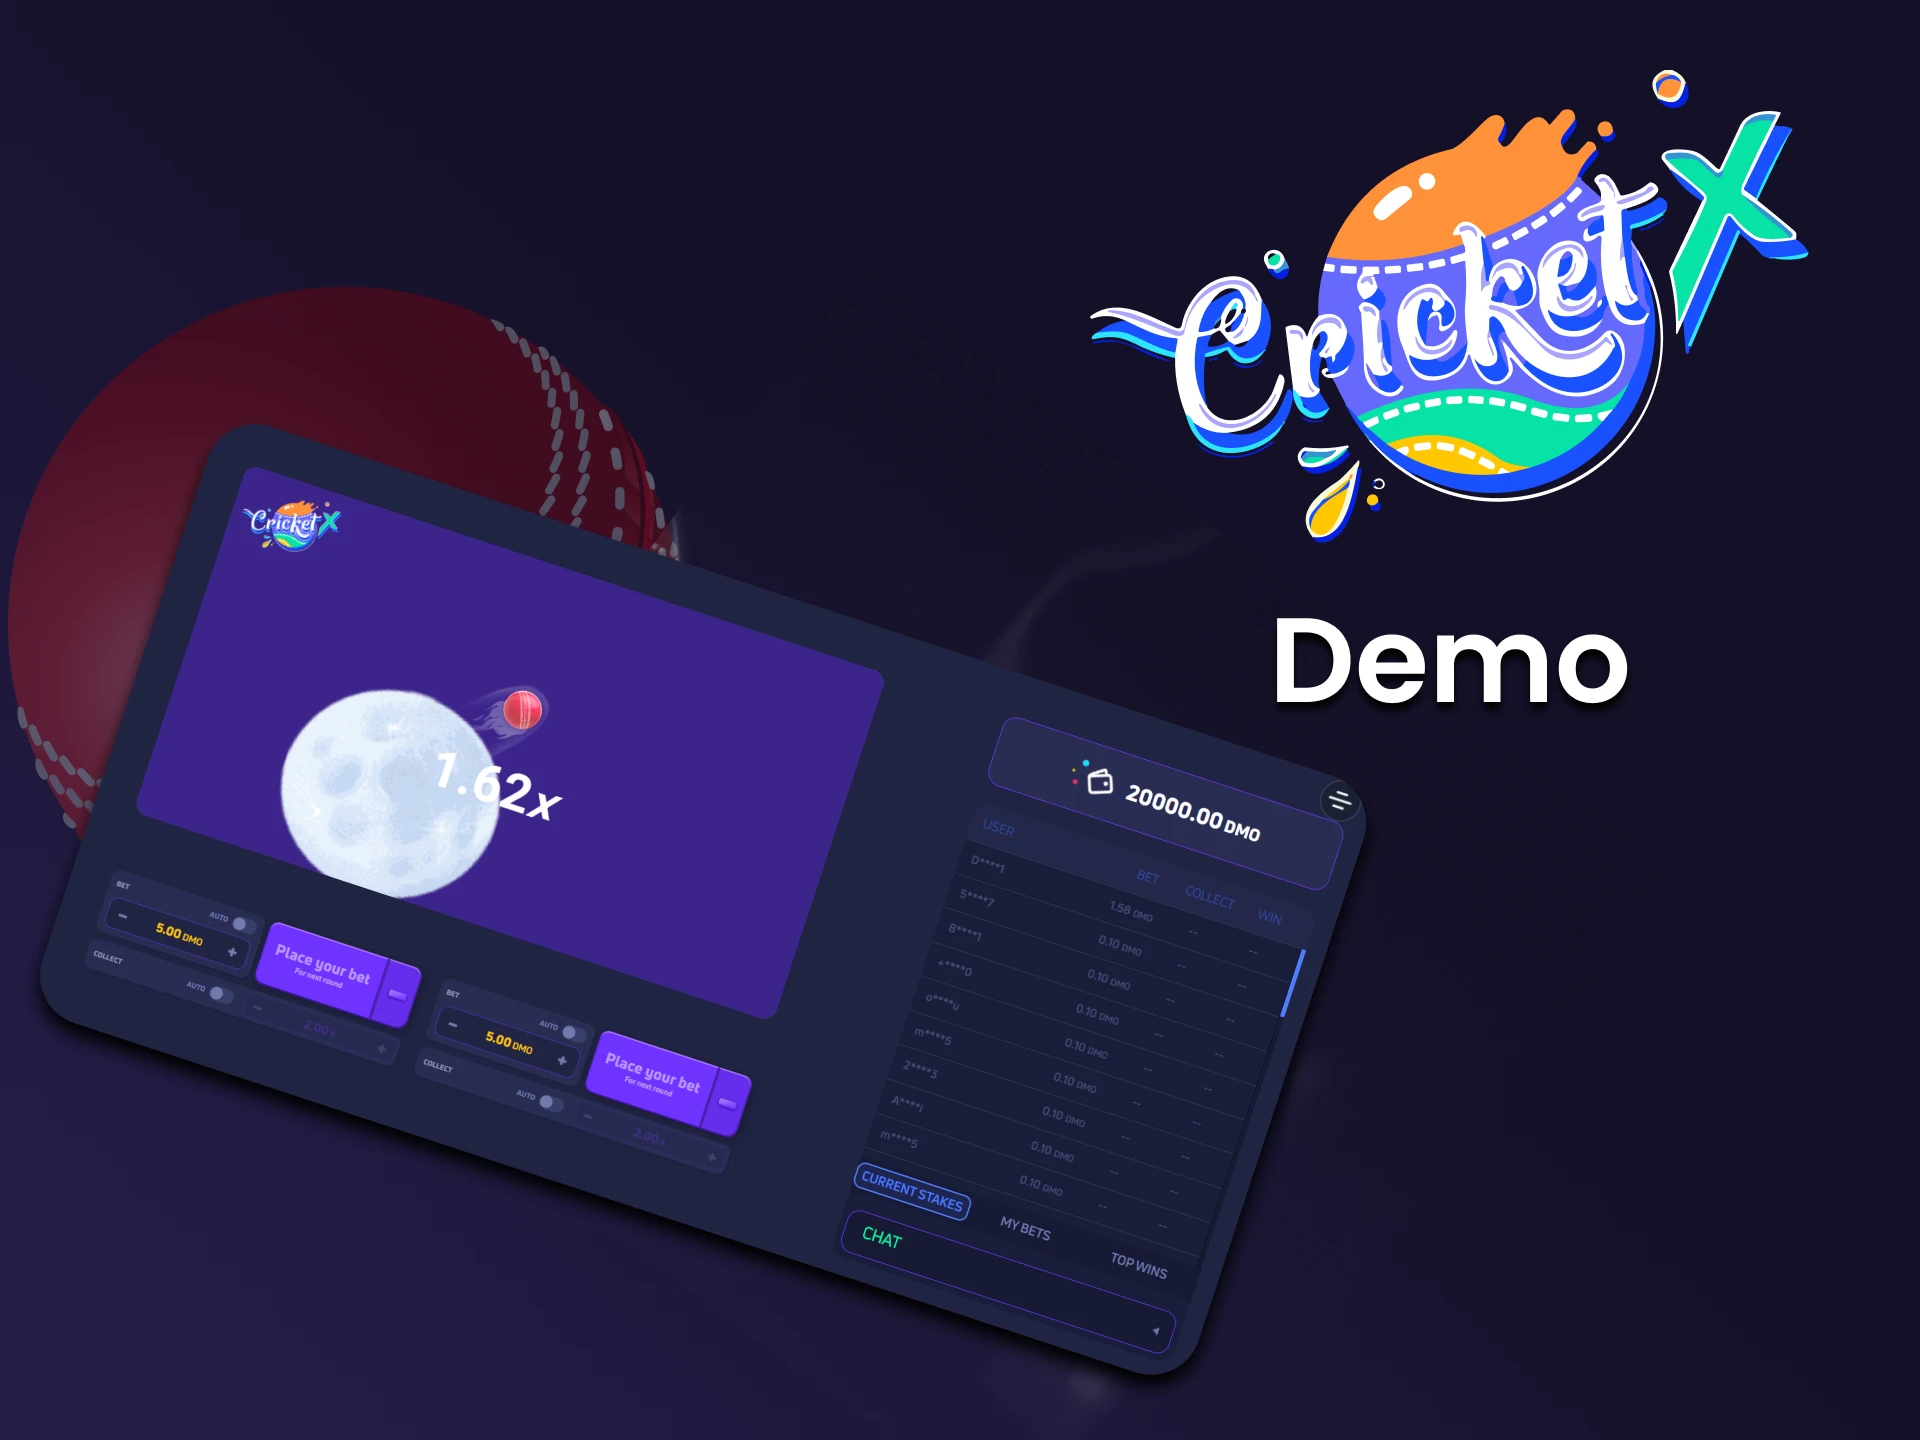 Practice in the demo version of the game Cricket X.